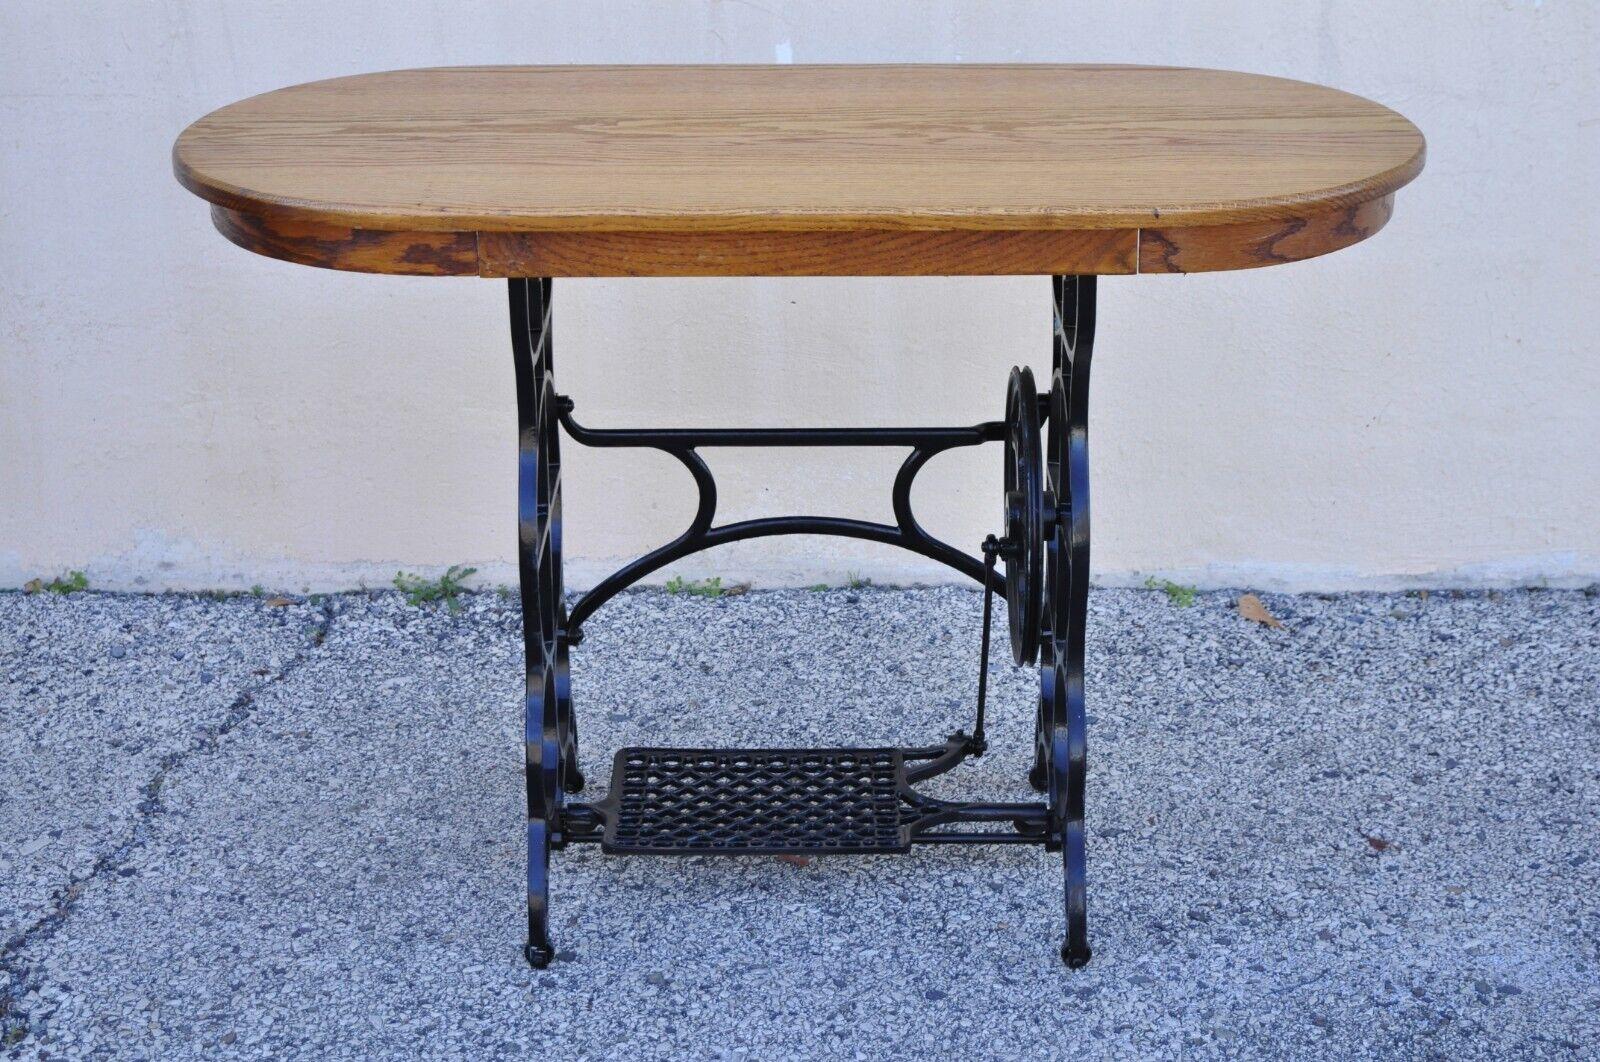 Antique Victorian cast iron treadle sewing machine base side table oval oak top. Item features an oval oak wood top, working cast iron treadle sewing machine base, very nice antique item, great style and form. Circa Early 1900s. Measurements: 30